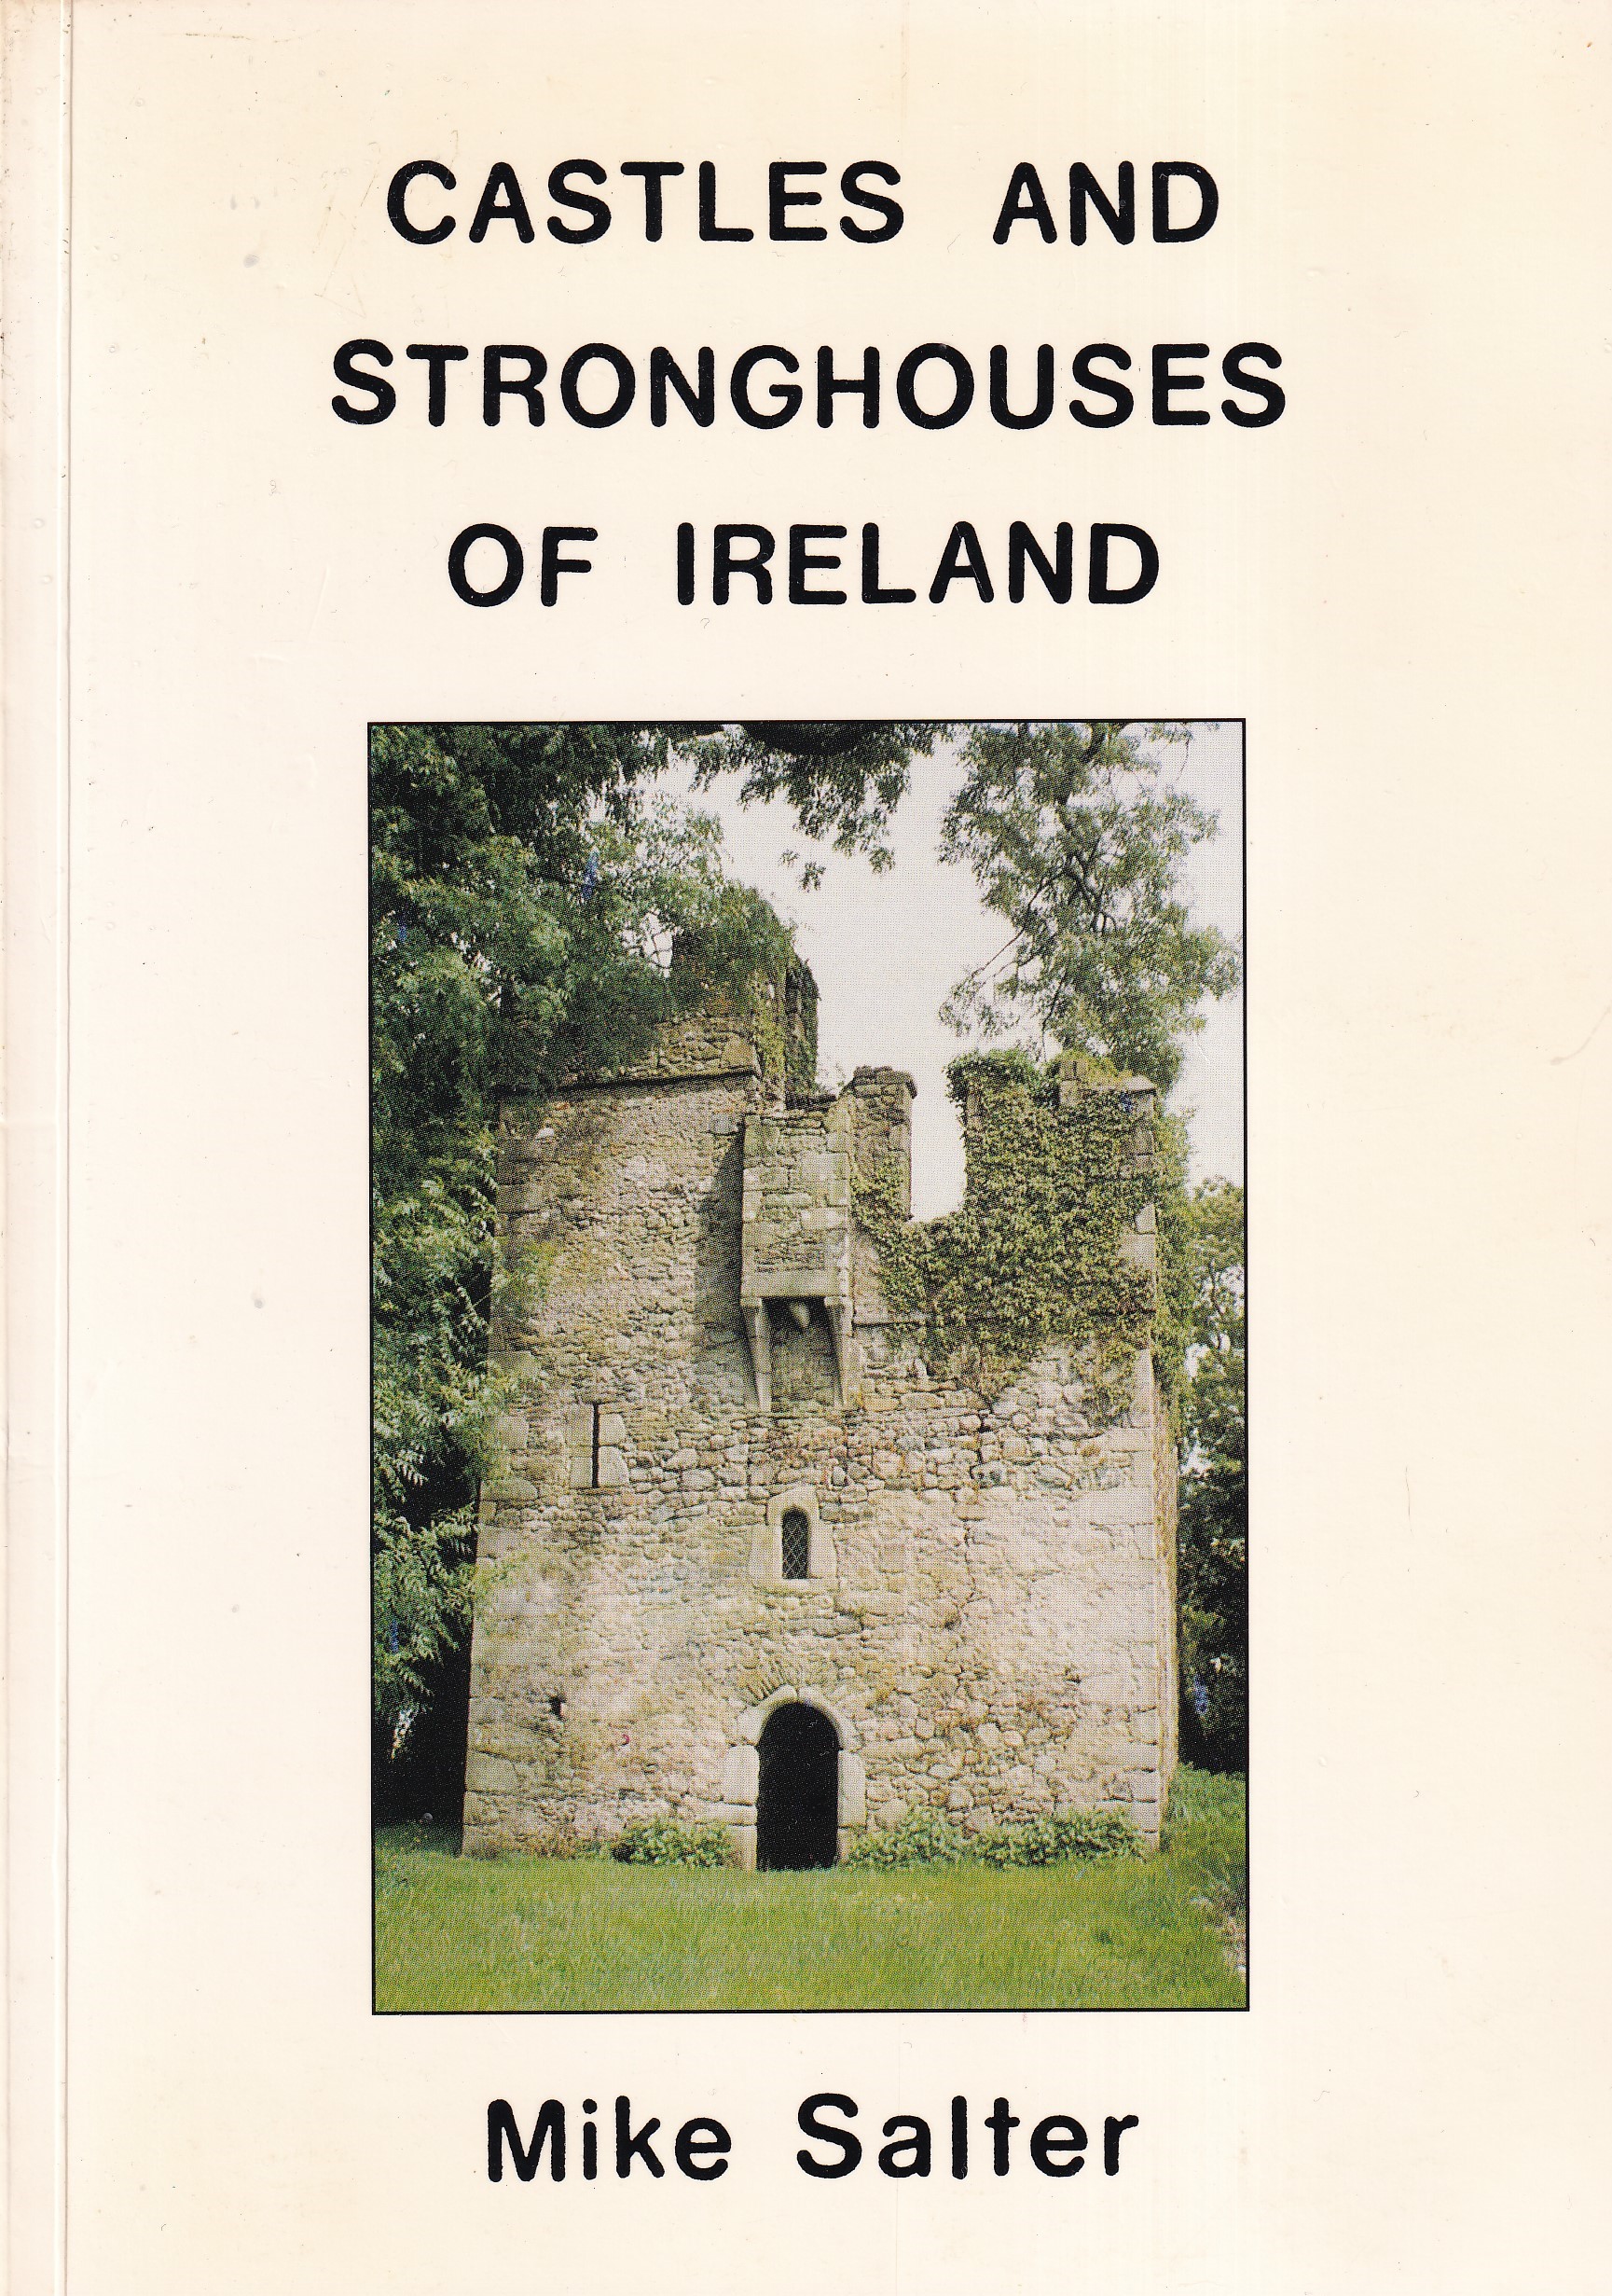 Castles and Stronghouses of Ireland | Mike Salter | Charlie Byrne's